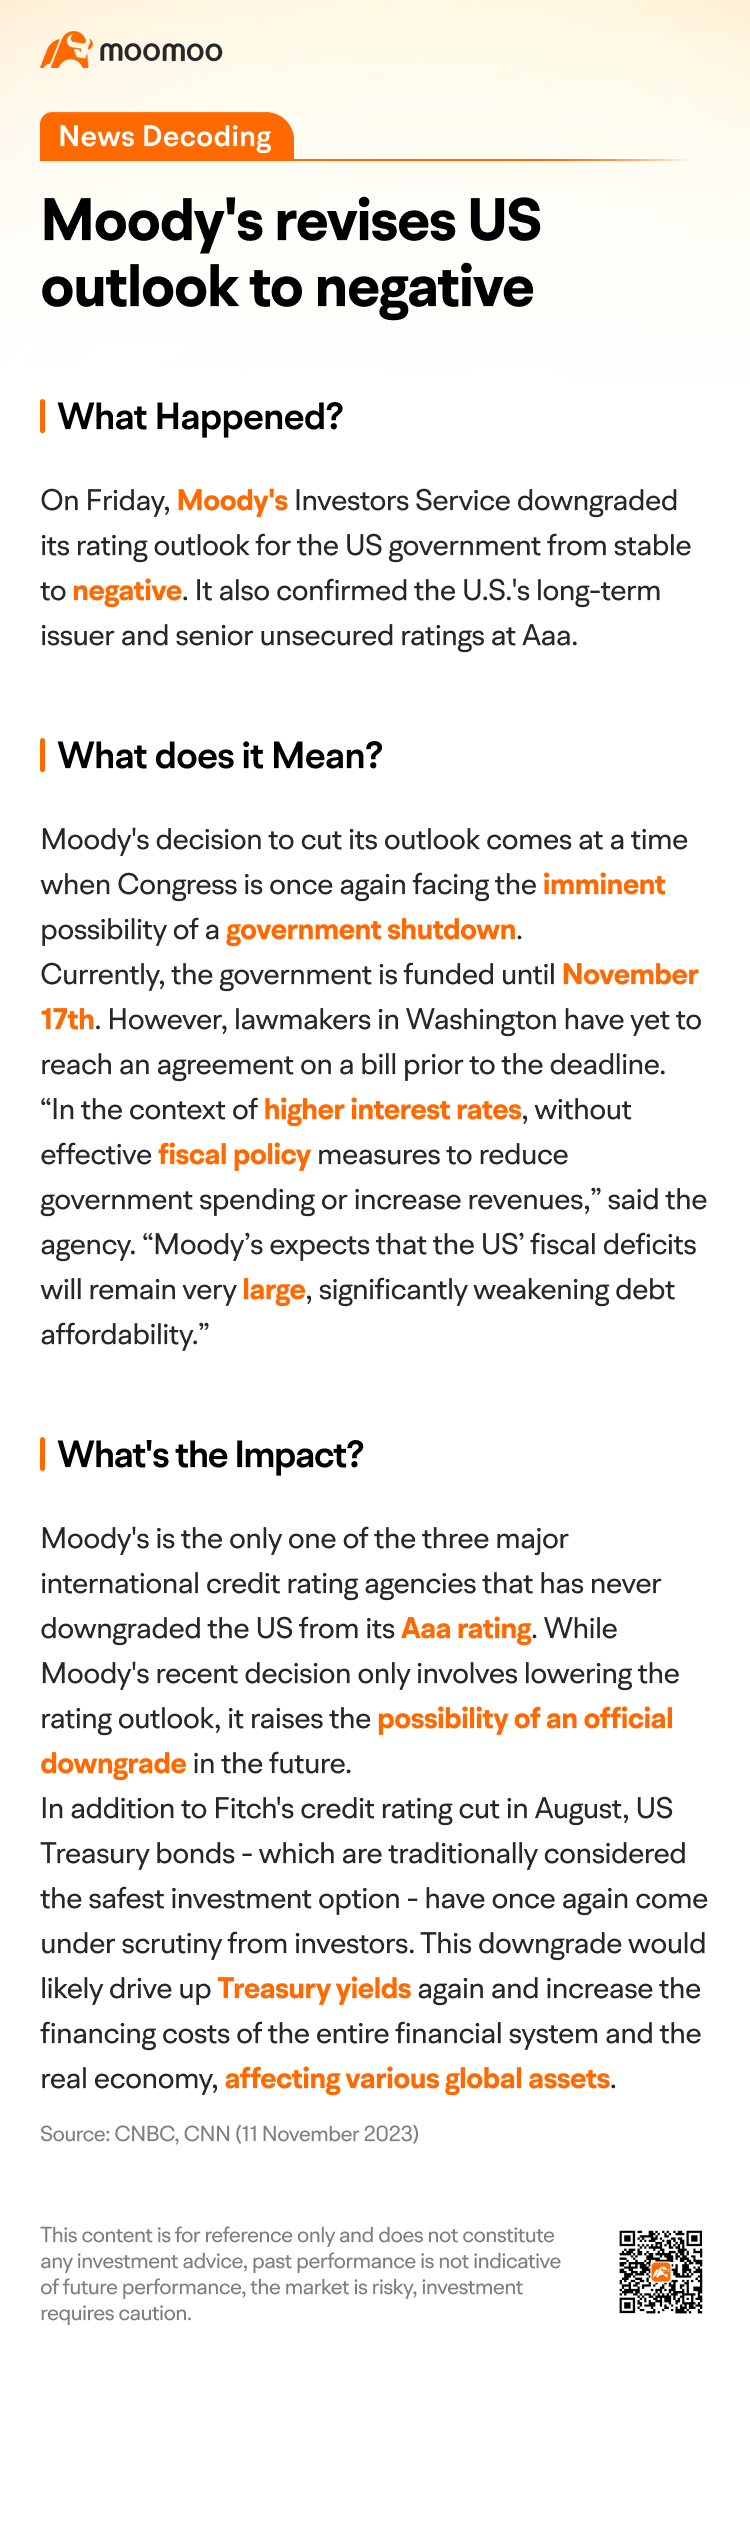 Moody's revises US outlook to negative